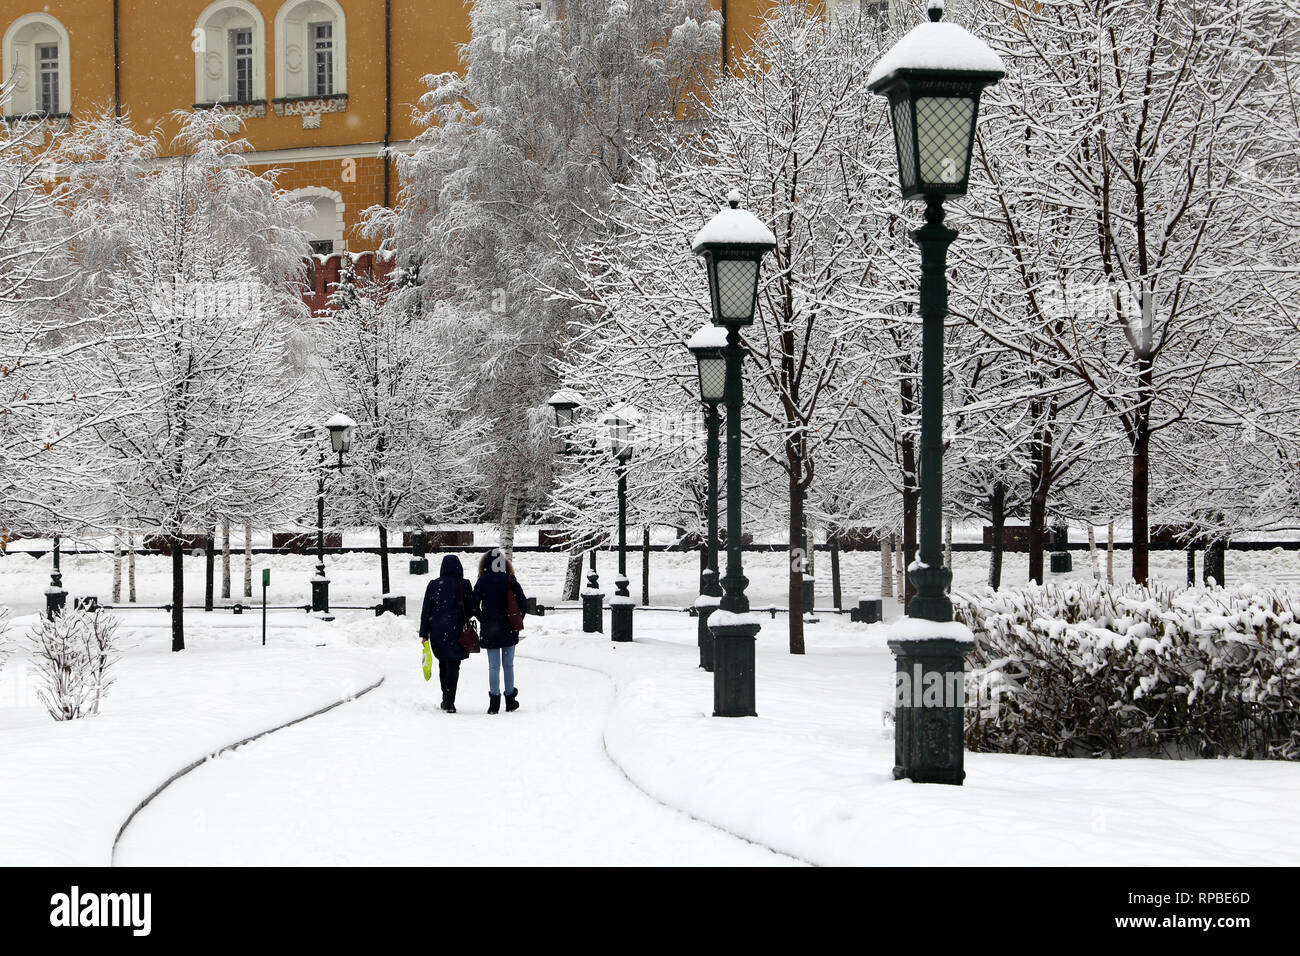 Snowfall in Moscow, people walking in Alexander garden during blizzard. Winter landscape with snow covered vintage lanterns and trees, cold weather Stock Photo